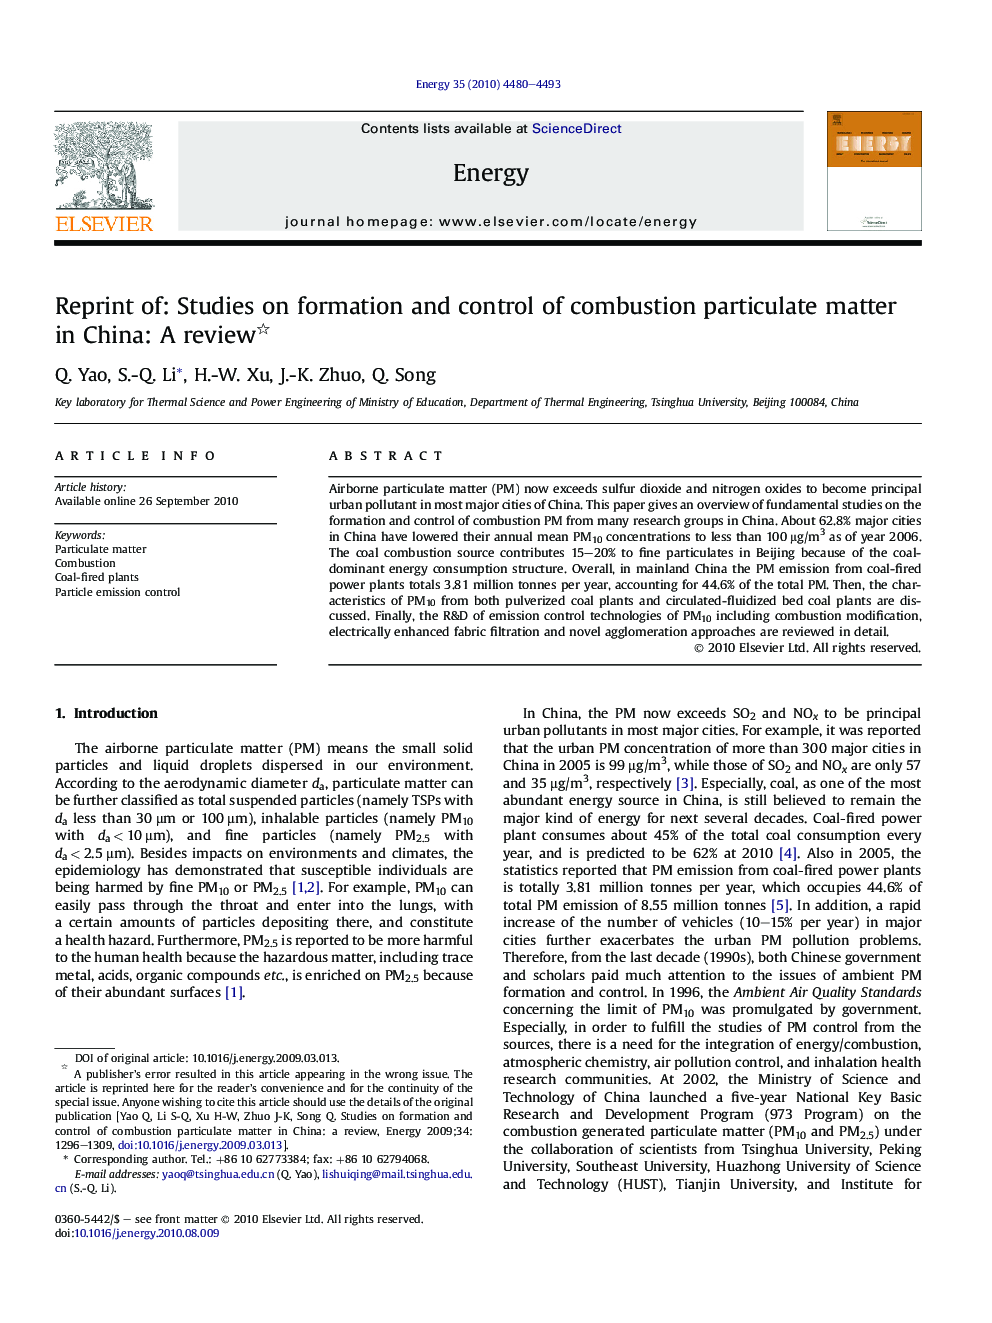 Reprint of: Studies on formation and control of combustion particulate matter in China: A review 